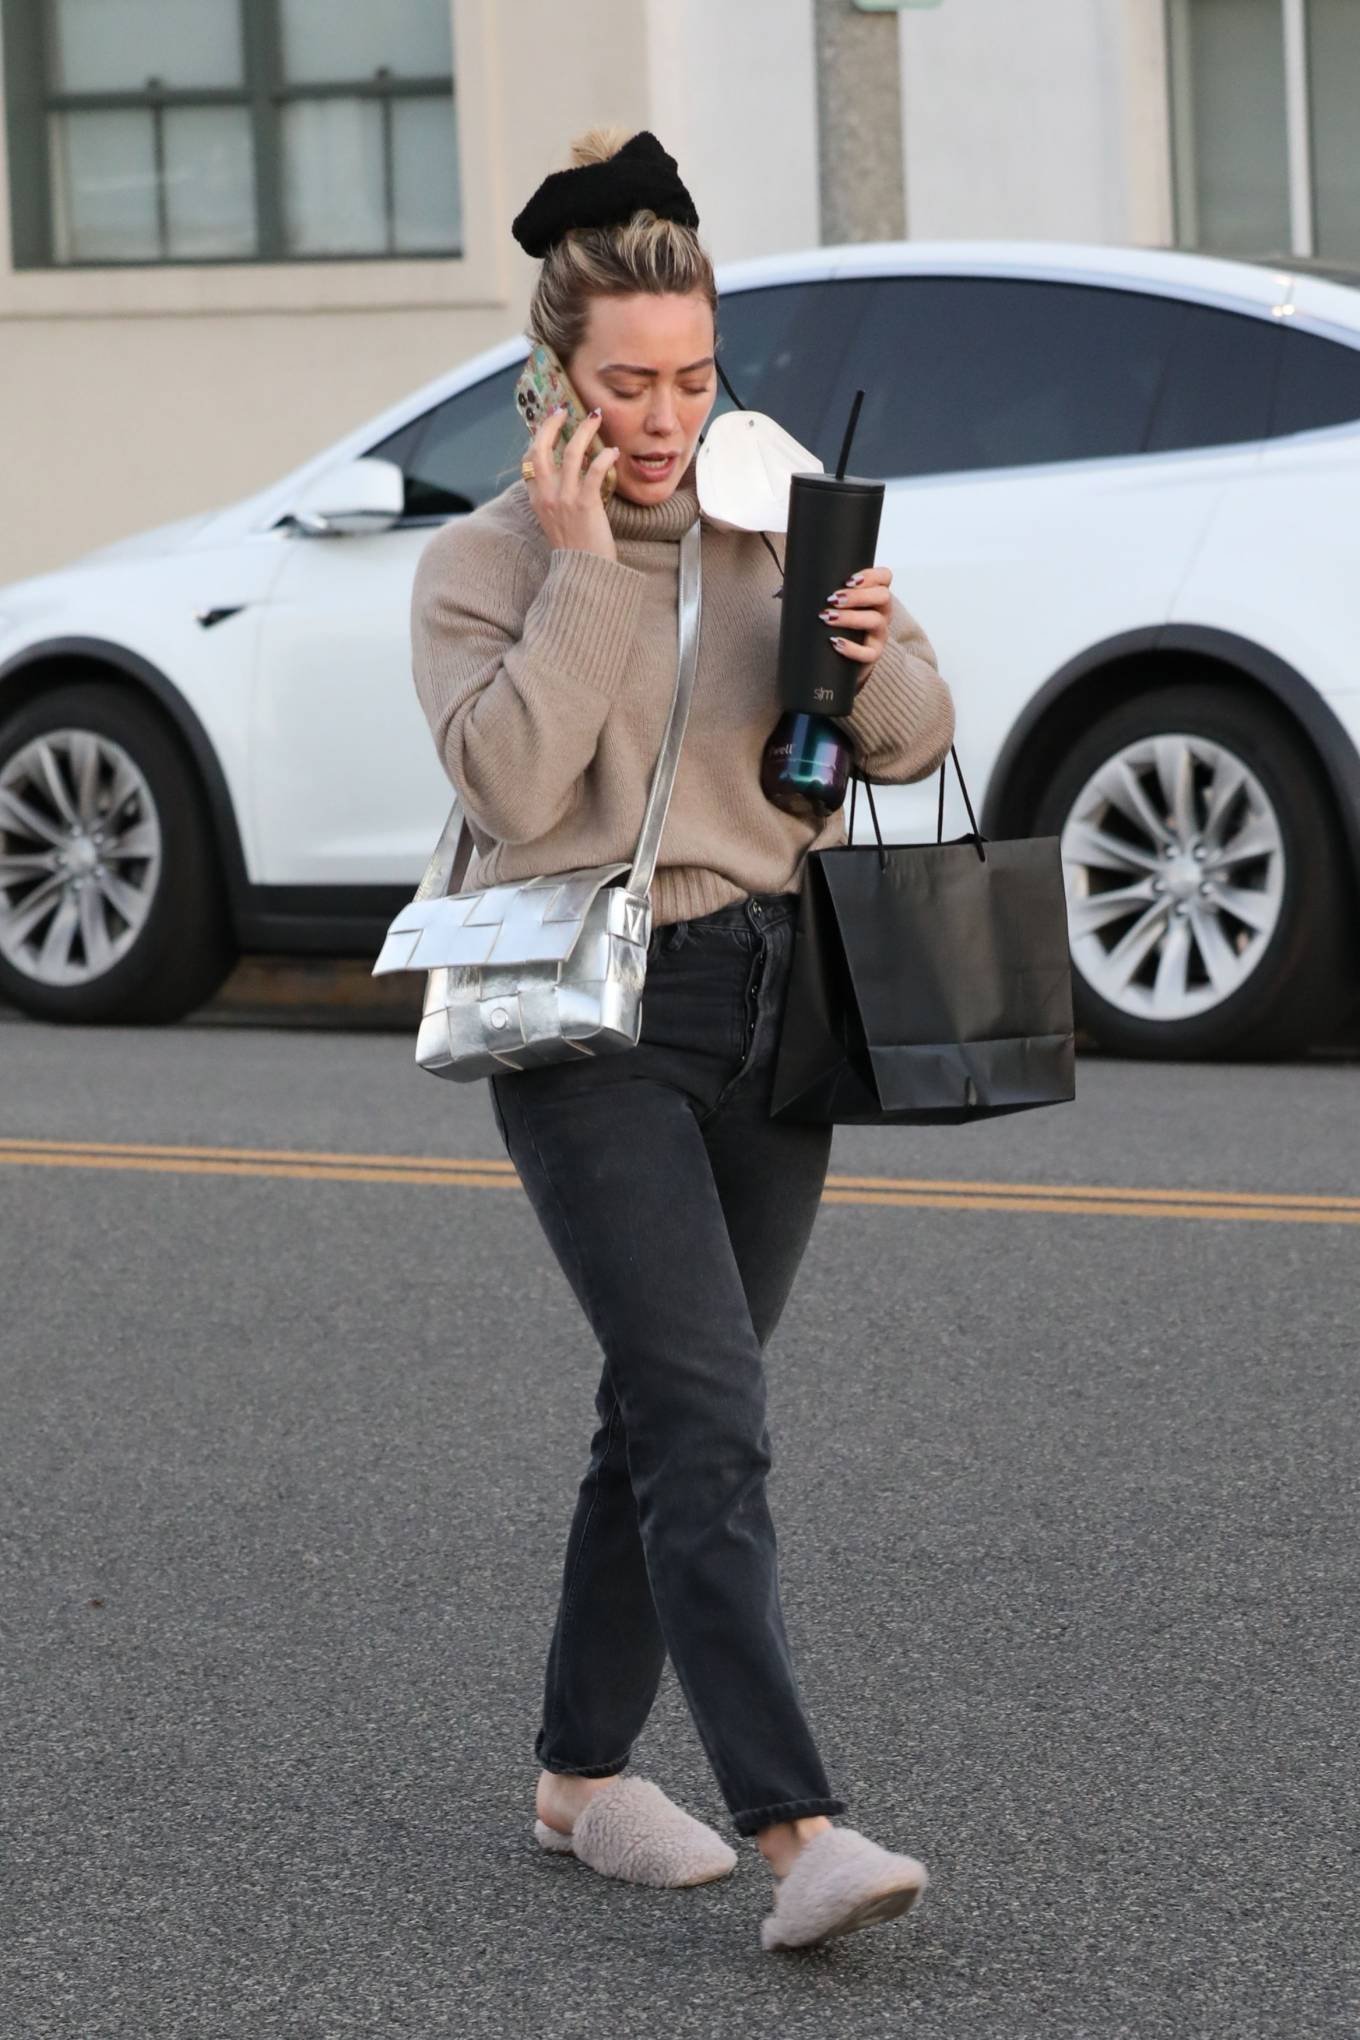 Hilary Duff - Chats on her phone while out in Beverly Hills